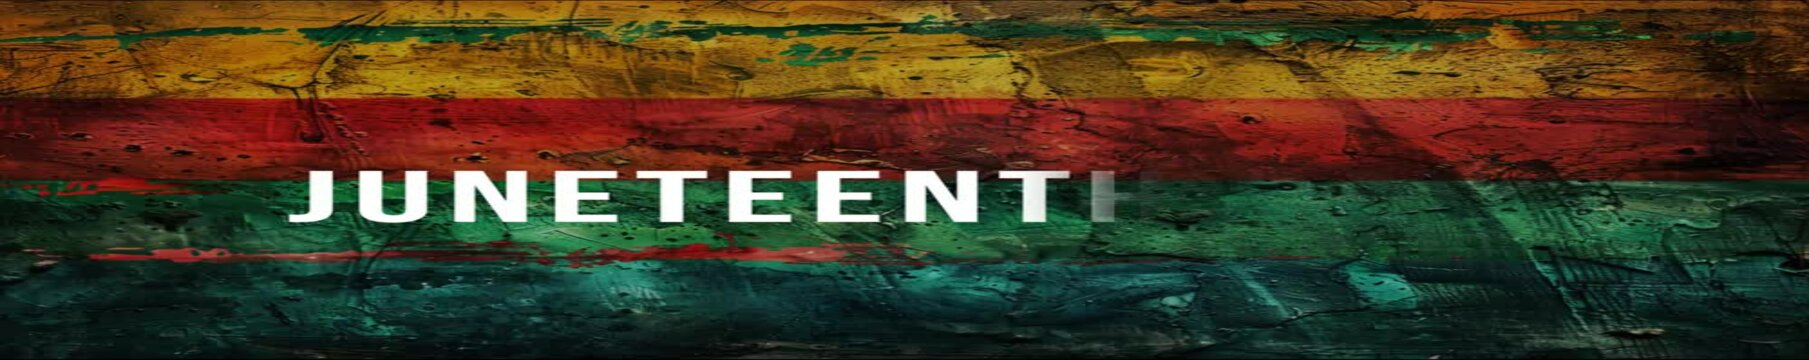 Juneteenth day Black History Month border and frame Animation, Juneteenth 4k, Juneteenth freedom day animated text, June 19. African American Liberation Day. Black, red and green 4k video animation